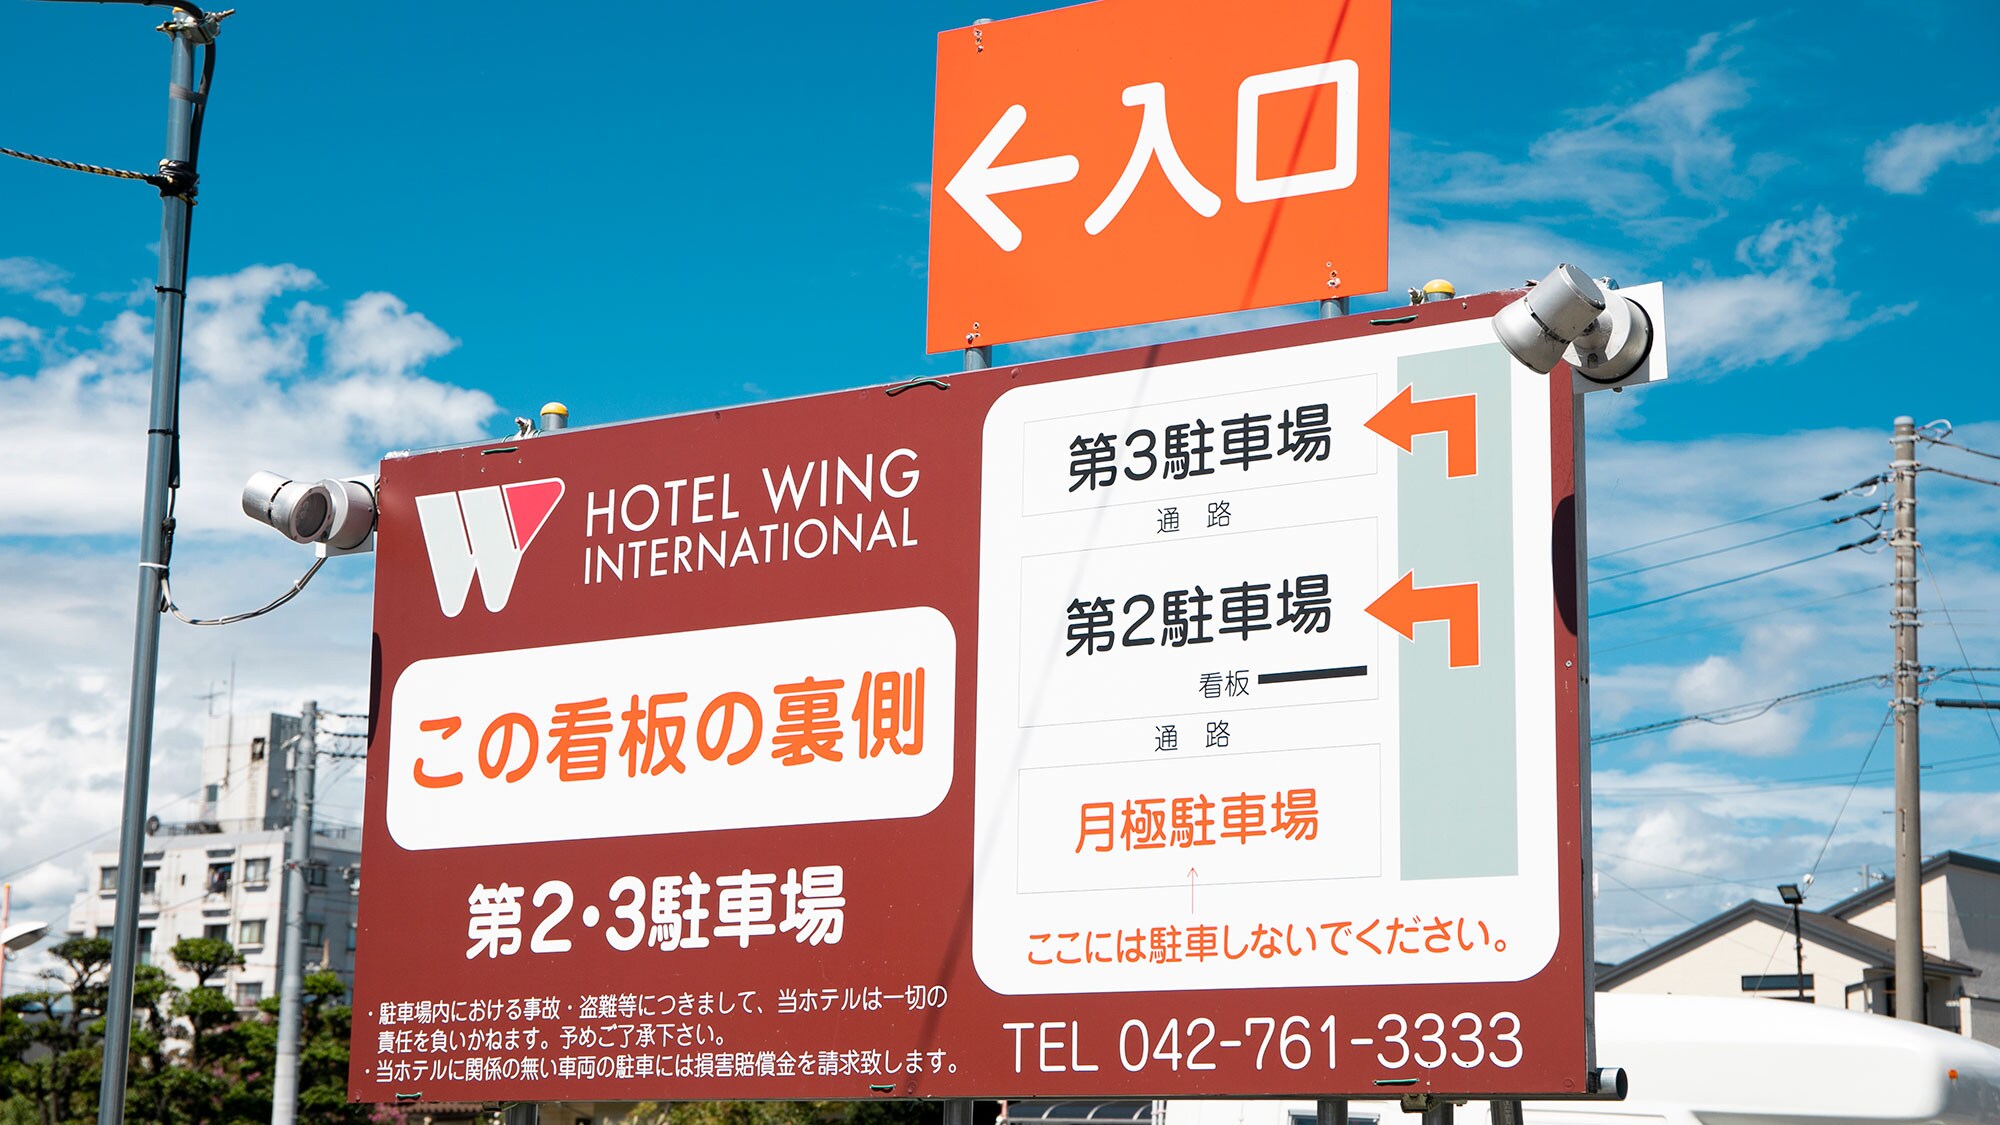 Hotel information and reservations for Hotel Wing International